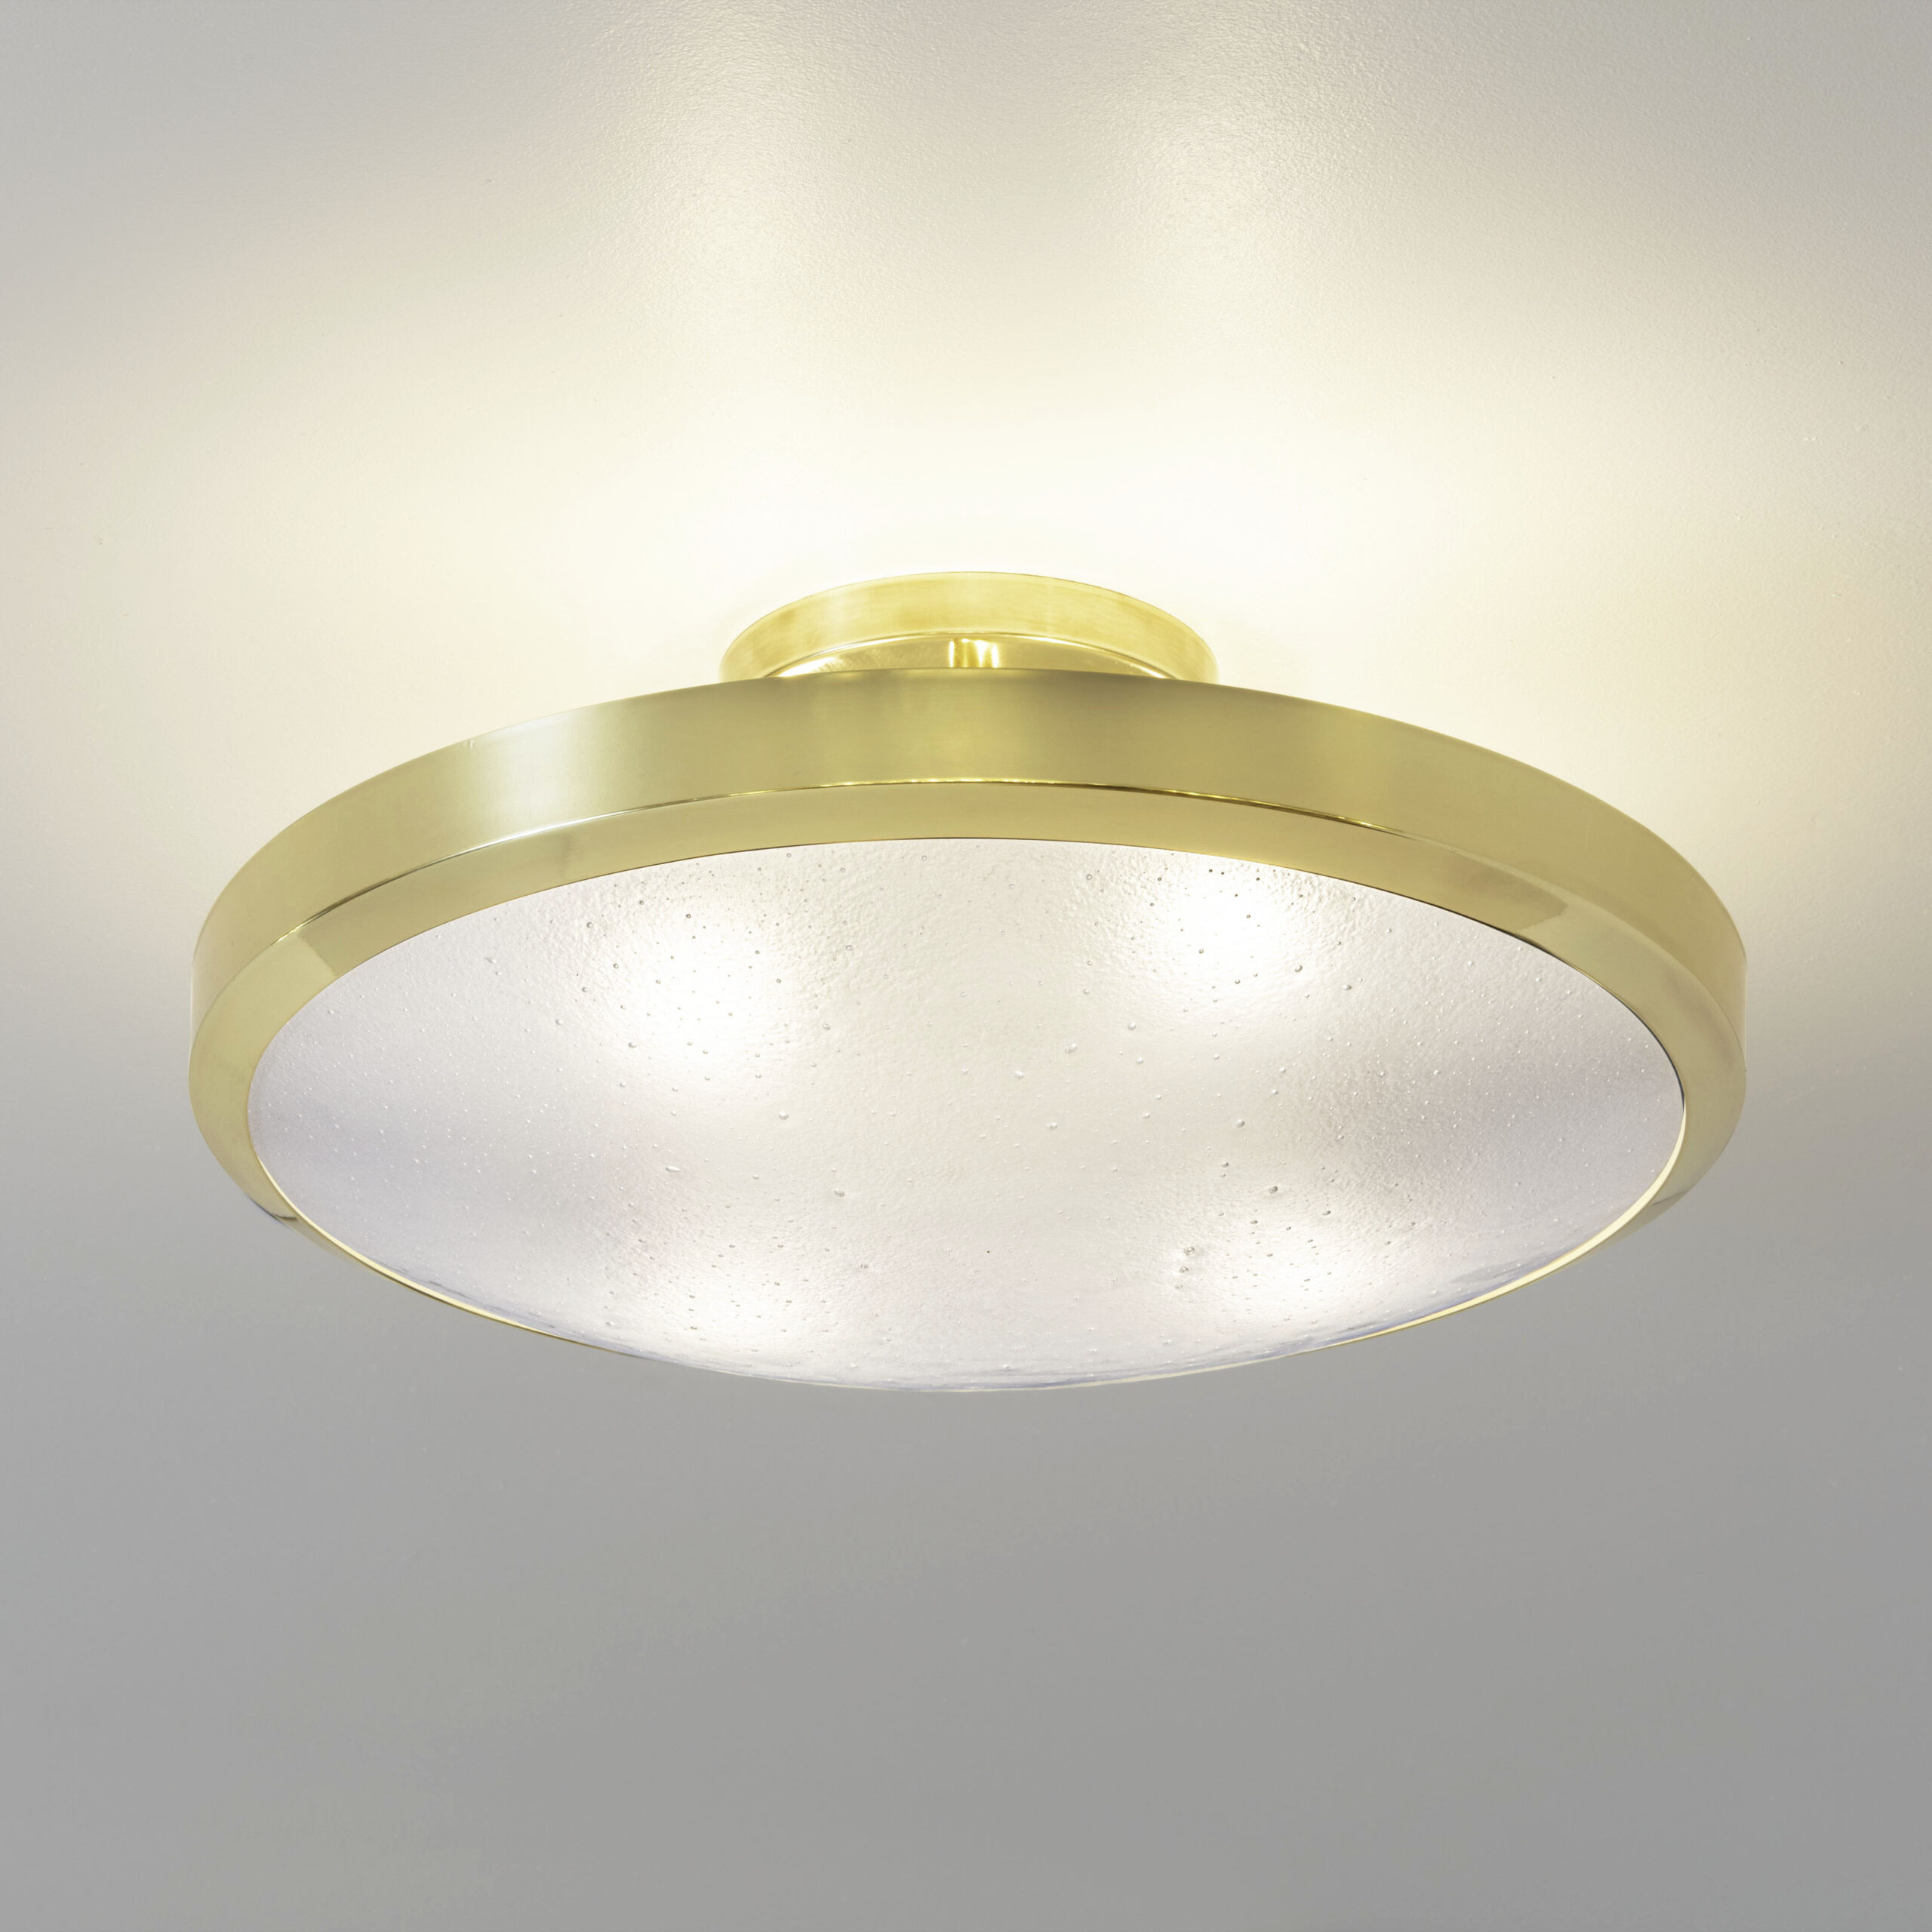 uno ceiling light form a by gaspare asaro